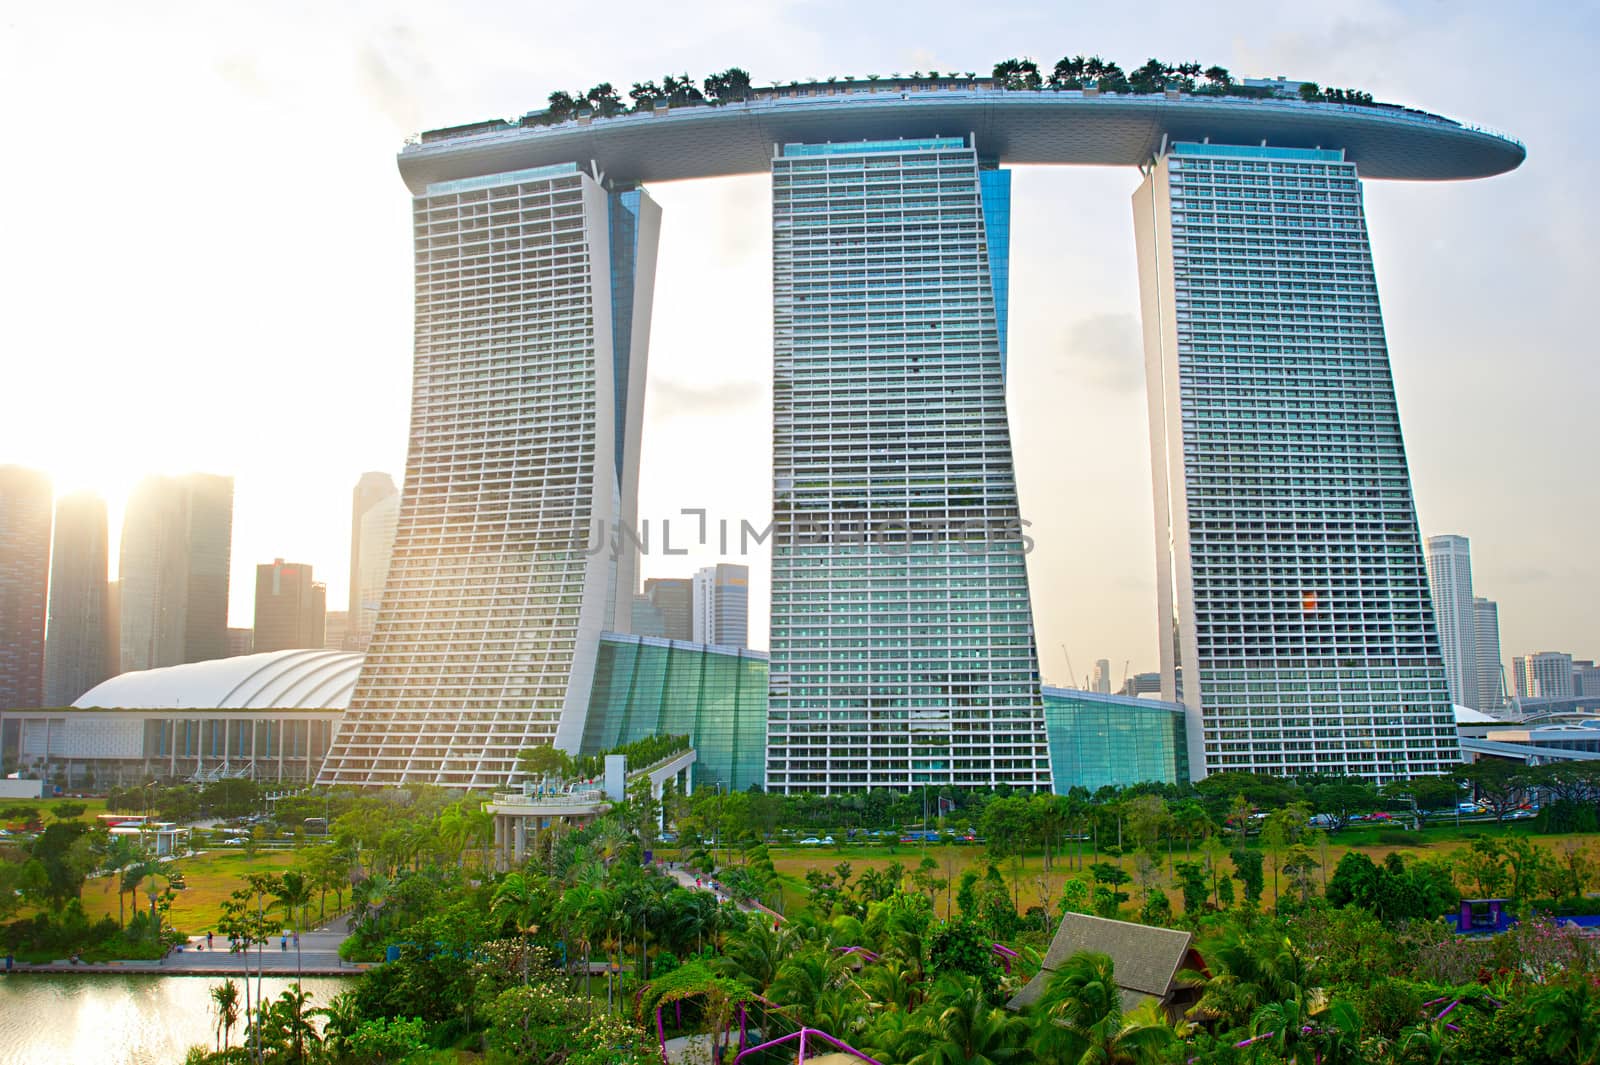 SINGAPORE - MARCH 05, 2013: Marina Bay Sands Resort in Singapore. It is billed as the world's most expensive standalone casino property at S$8 billion